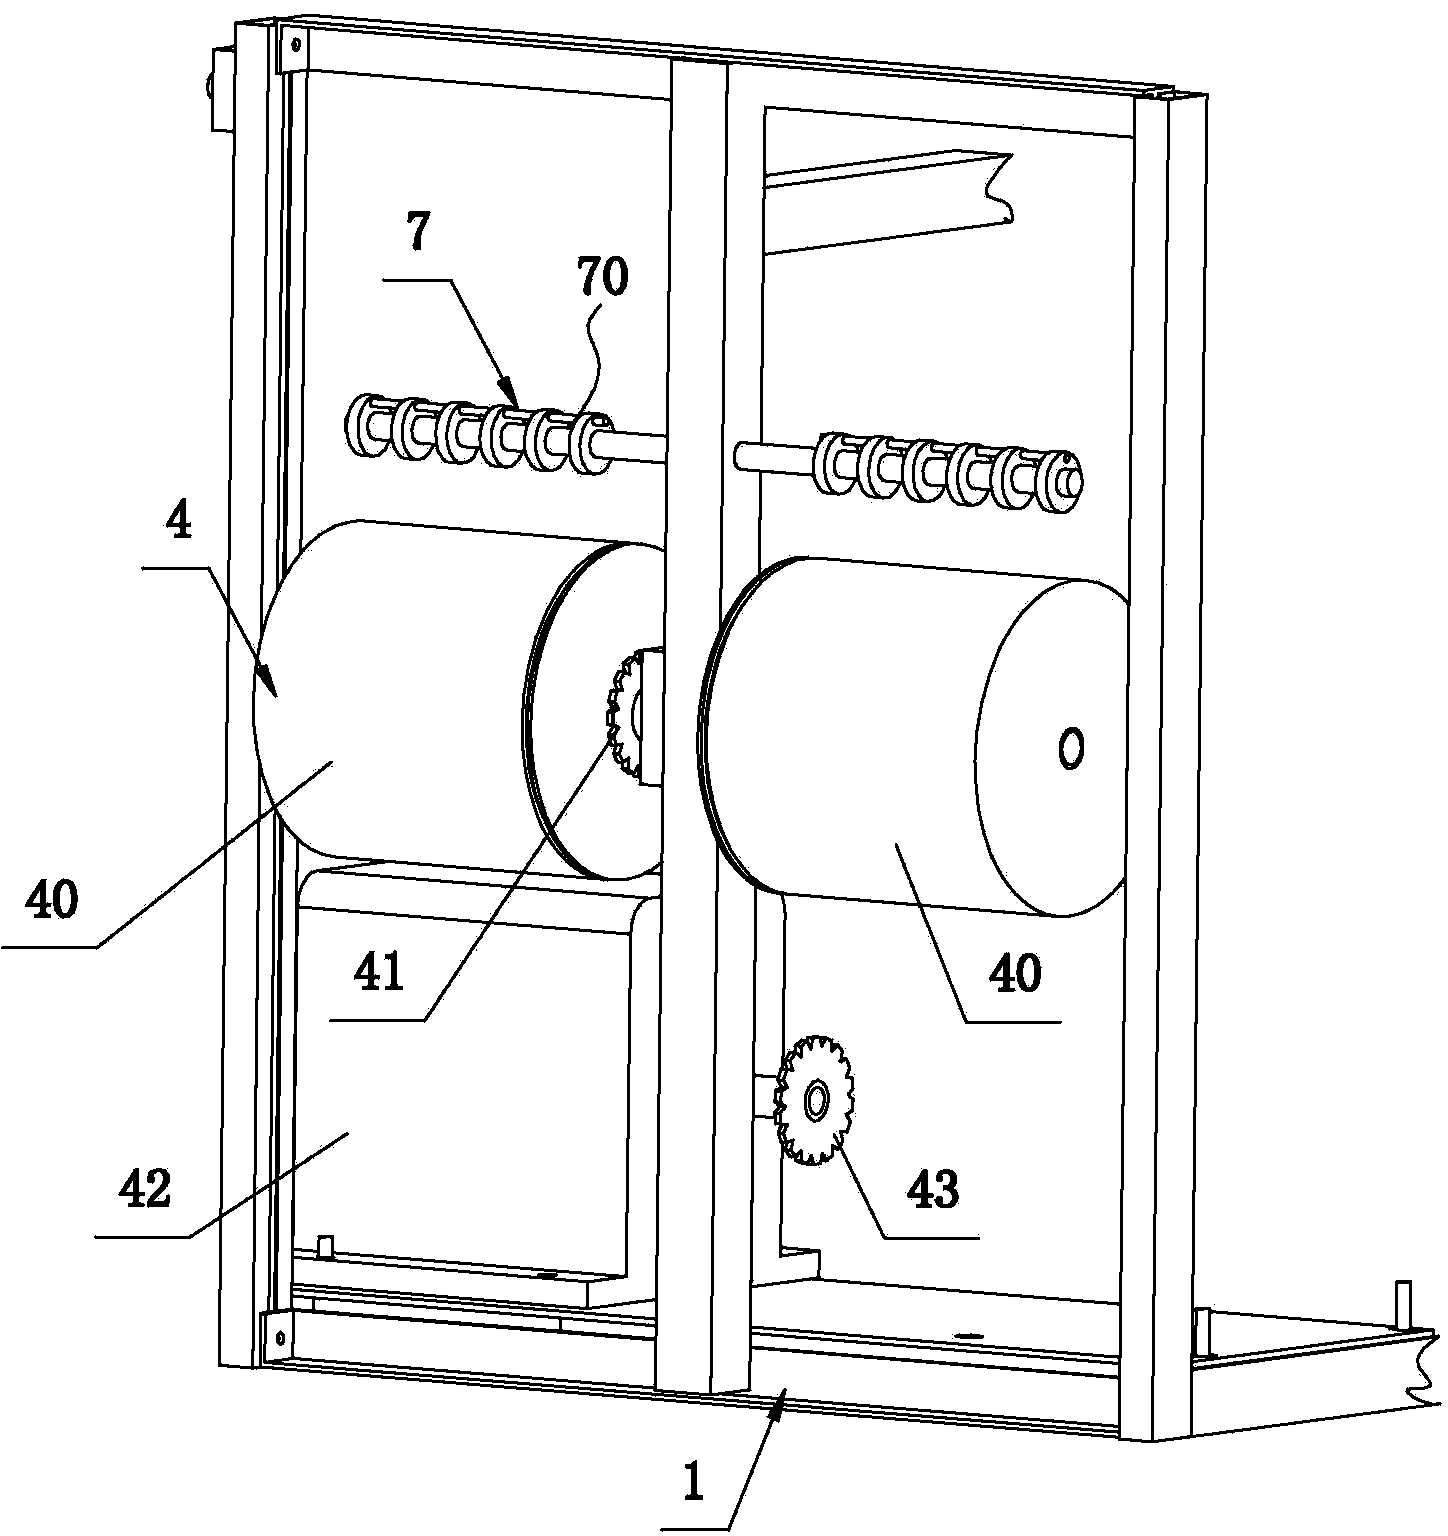 Feed tension stabilizing device for central line of zipper